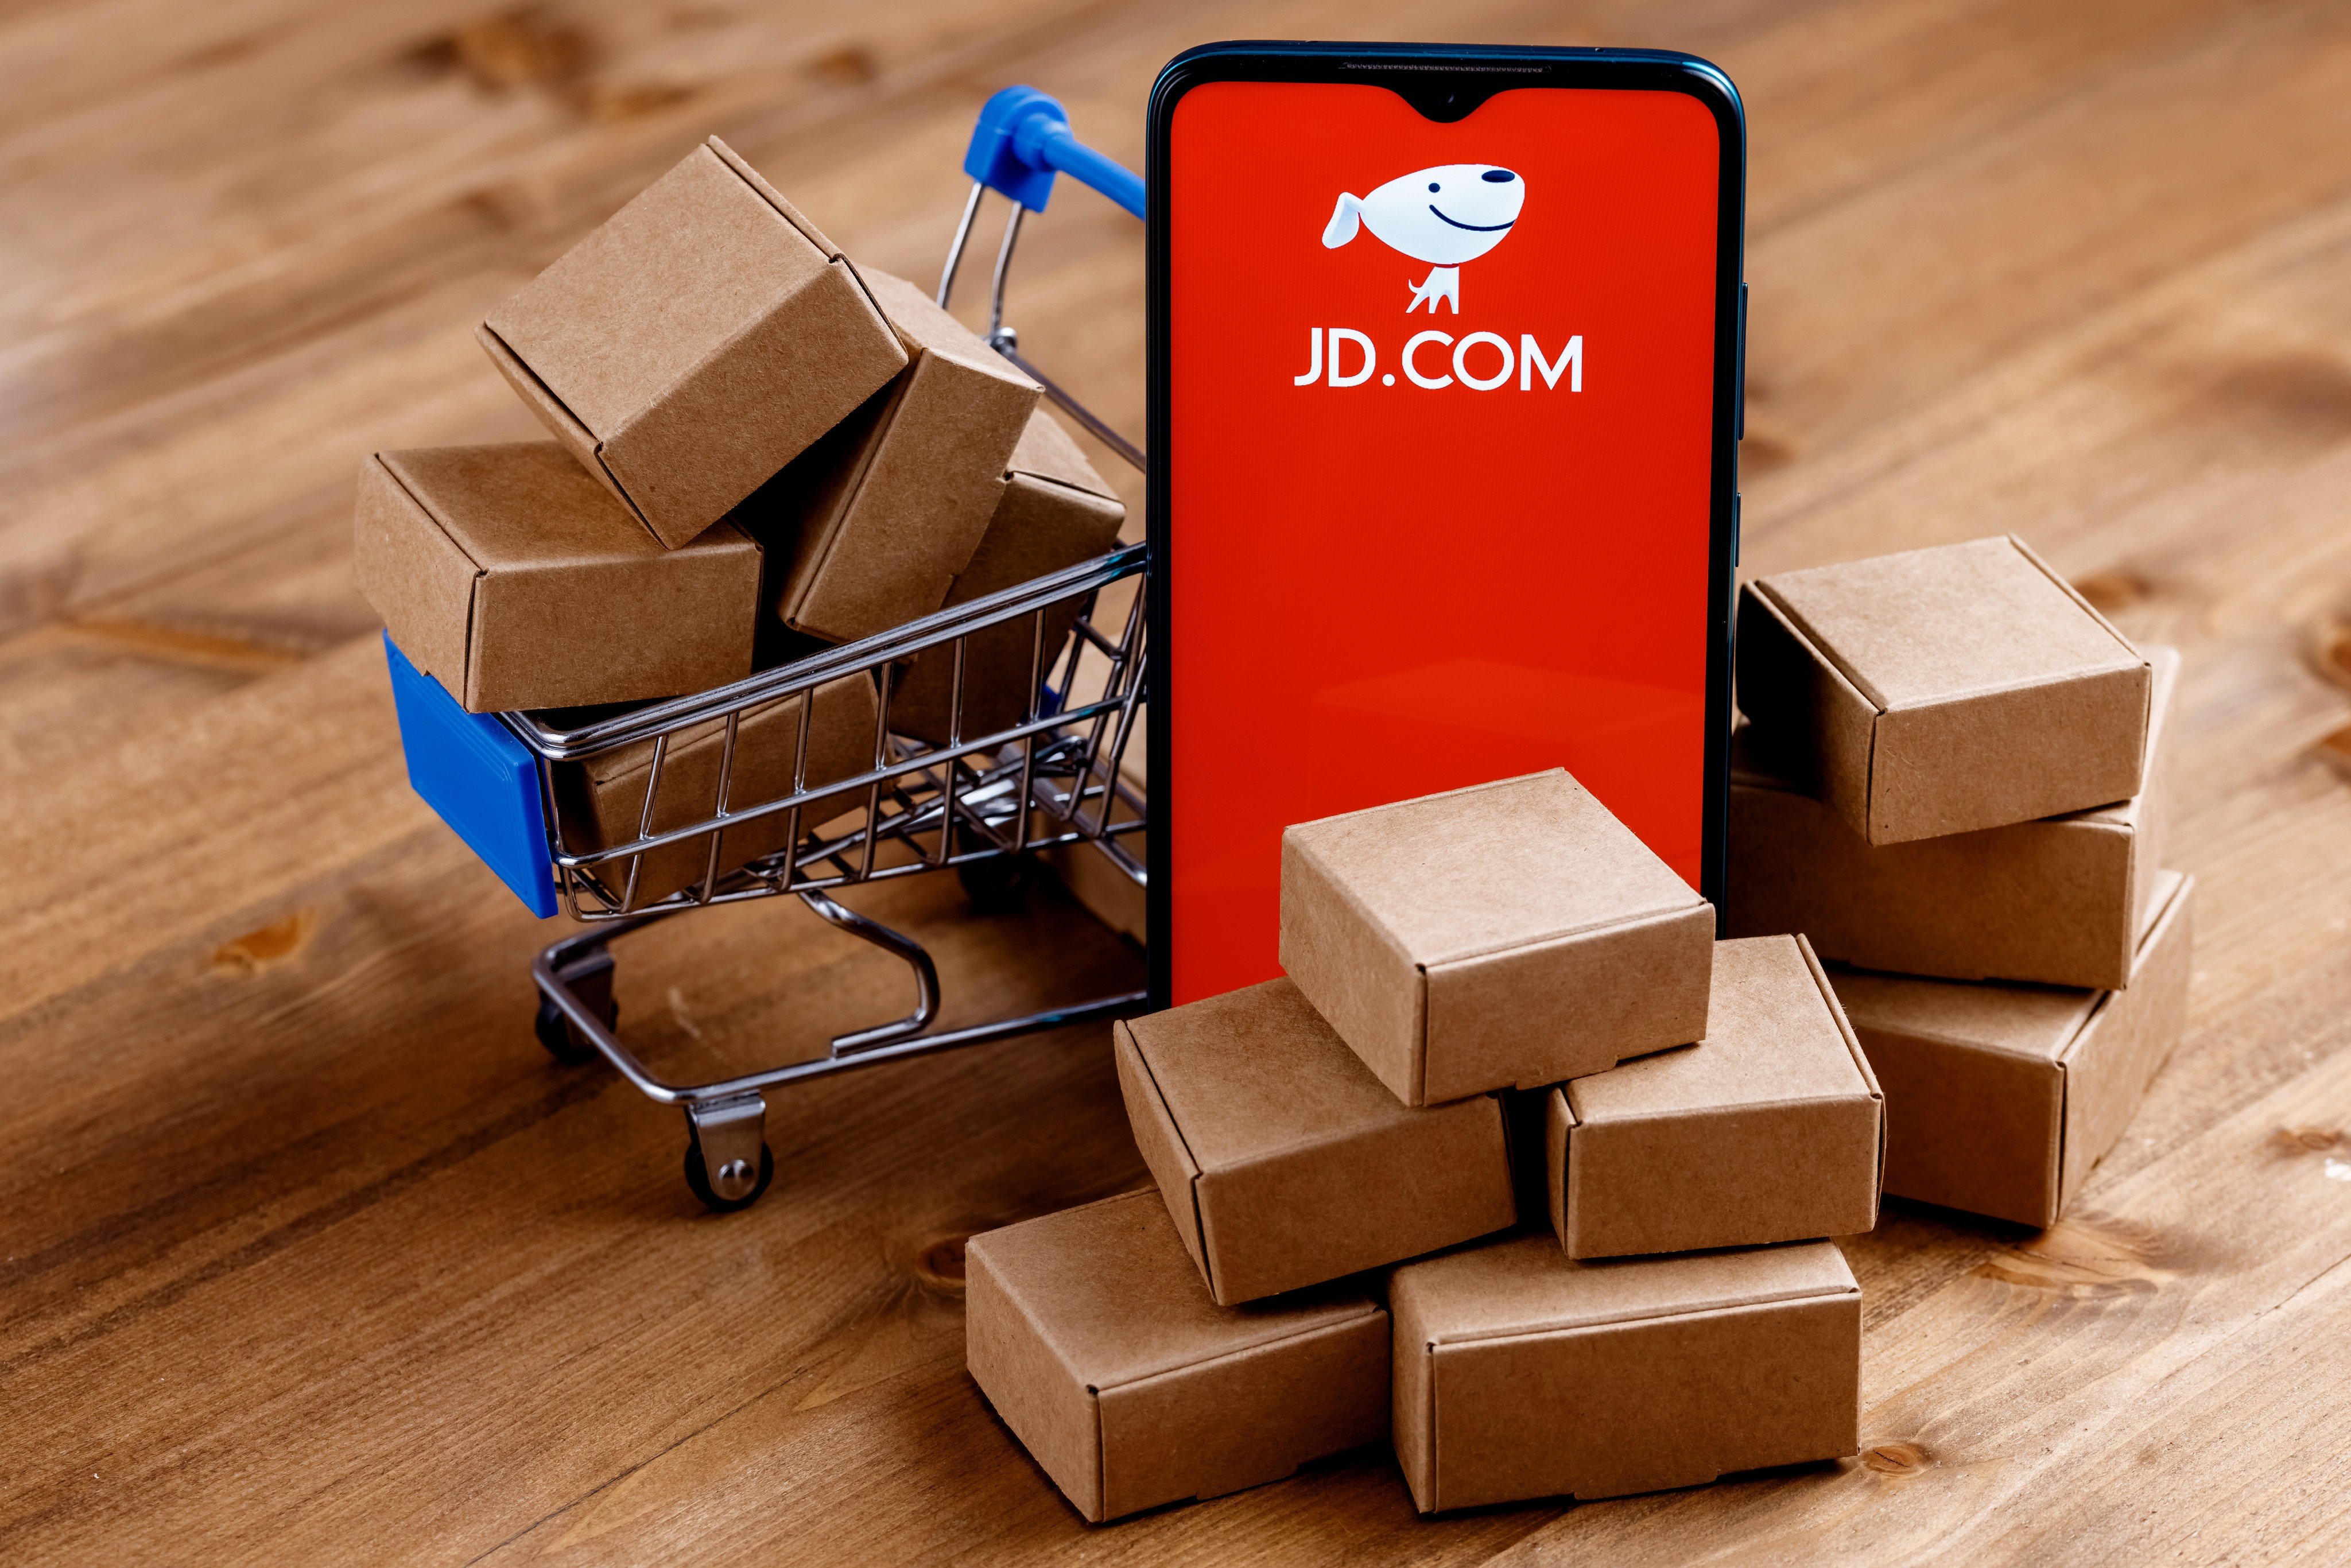 JD.com has been lowering prices amid rising competition. Photo: Shutterstock  